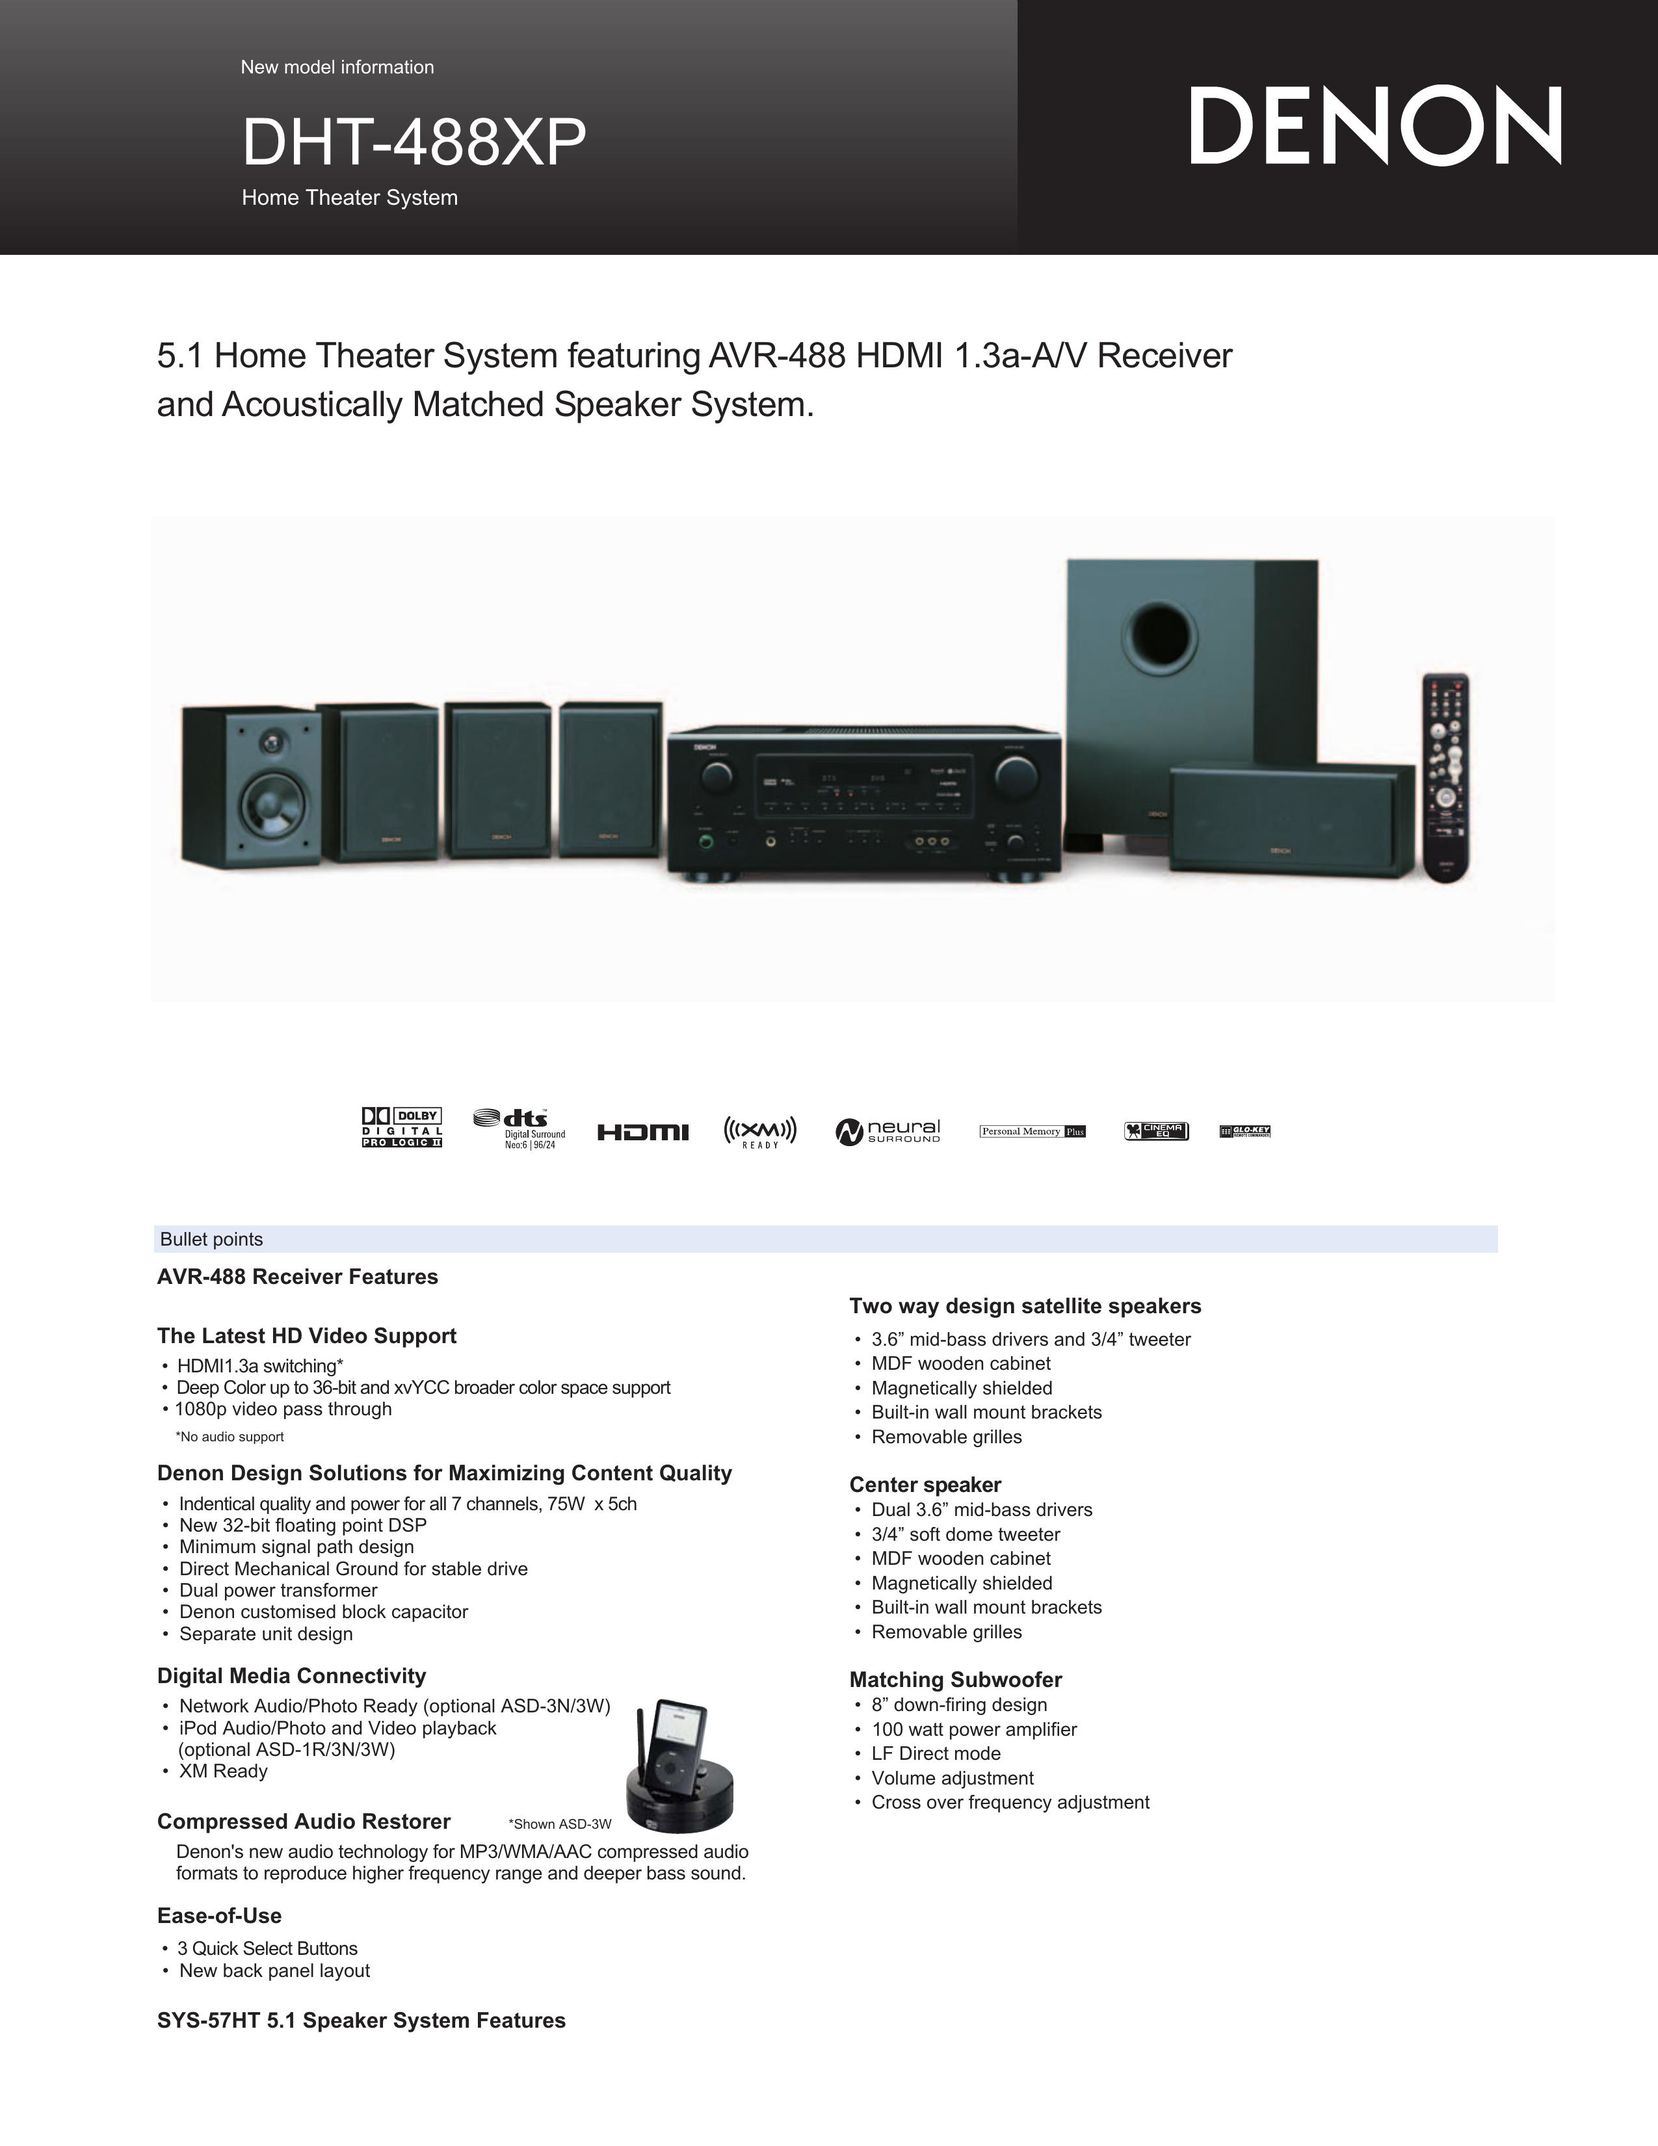 Denon DHT-488XP Home Theater System User Manual